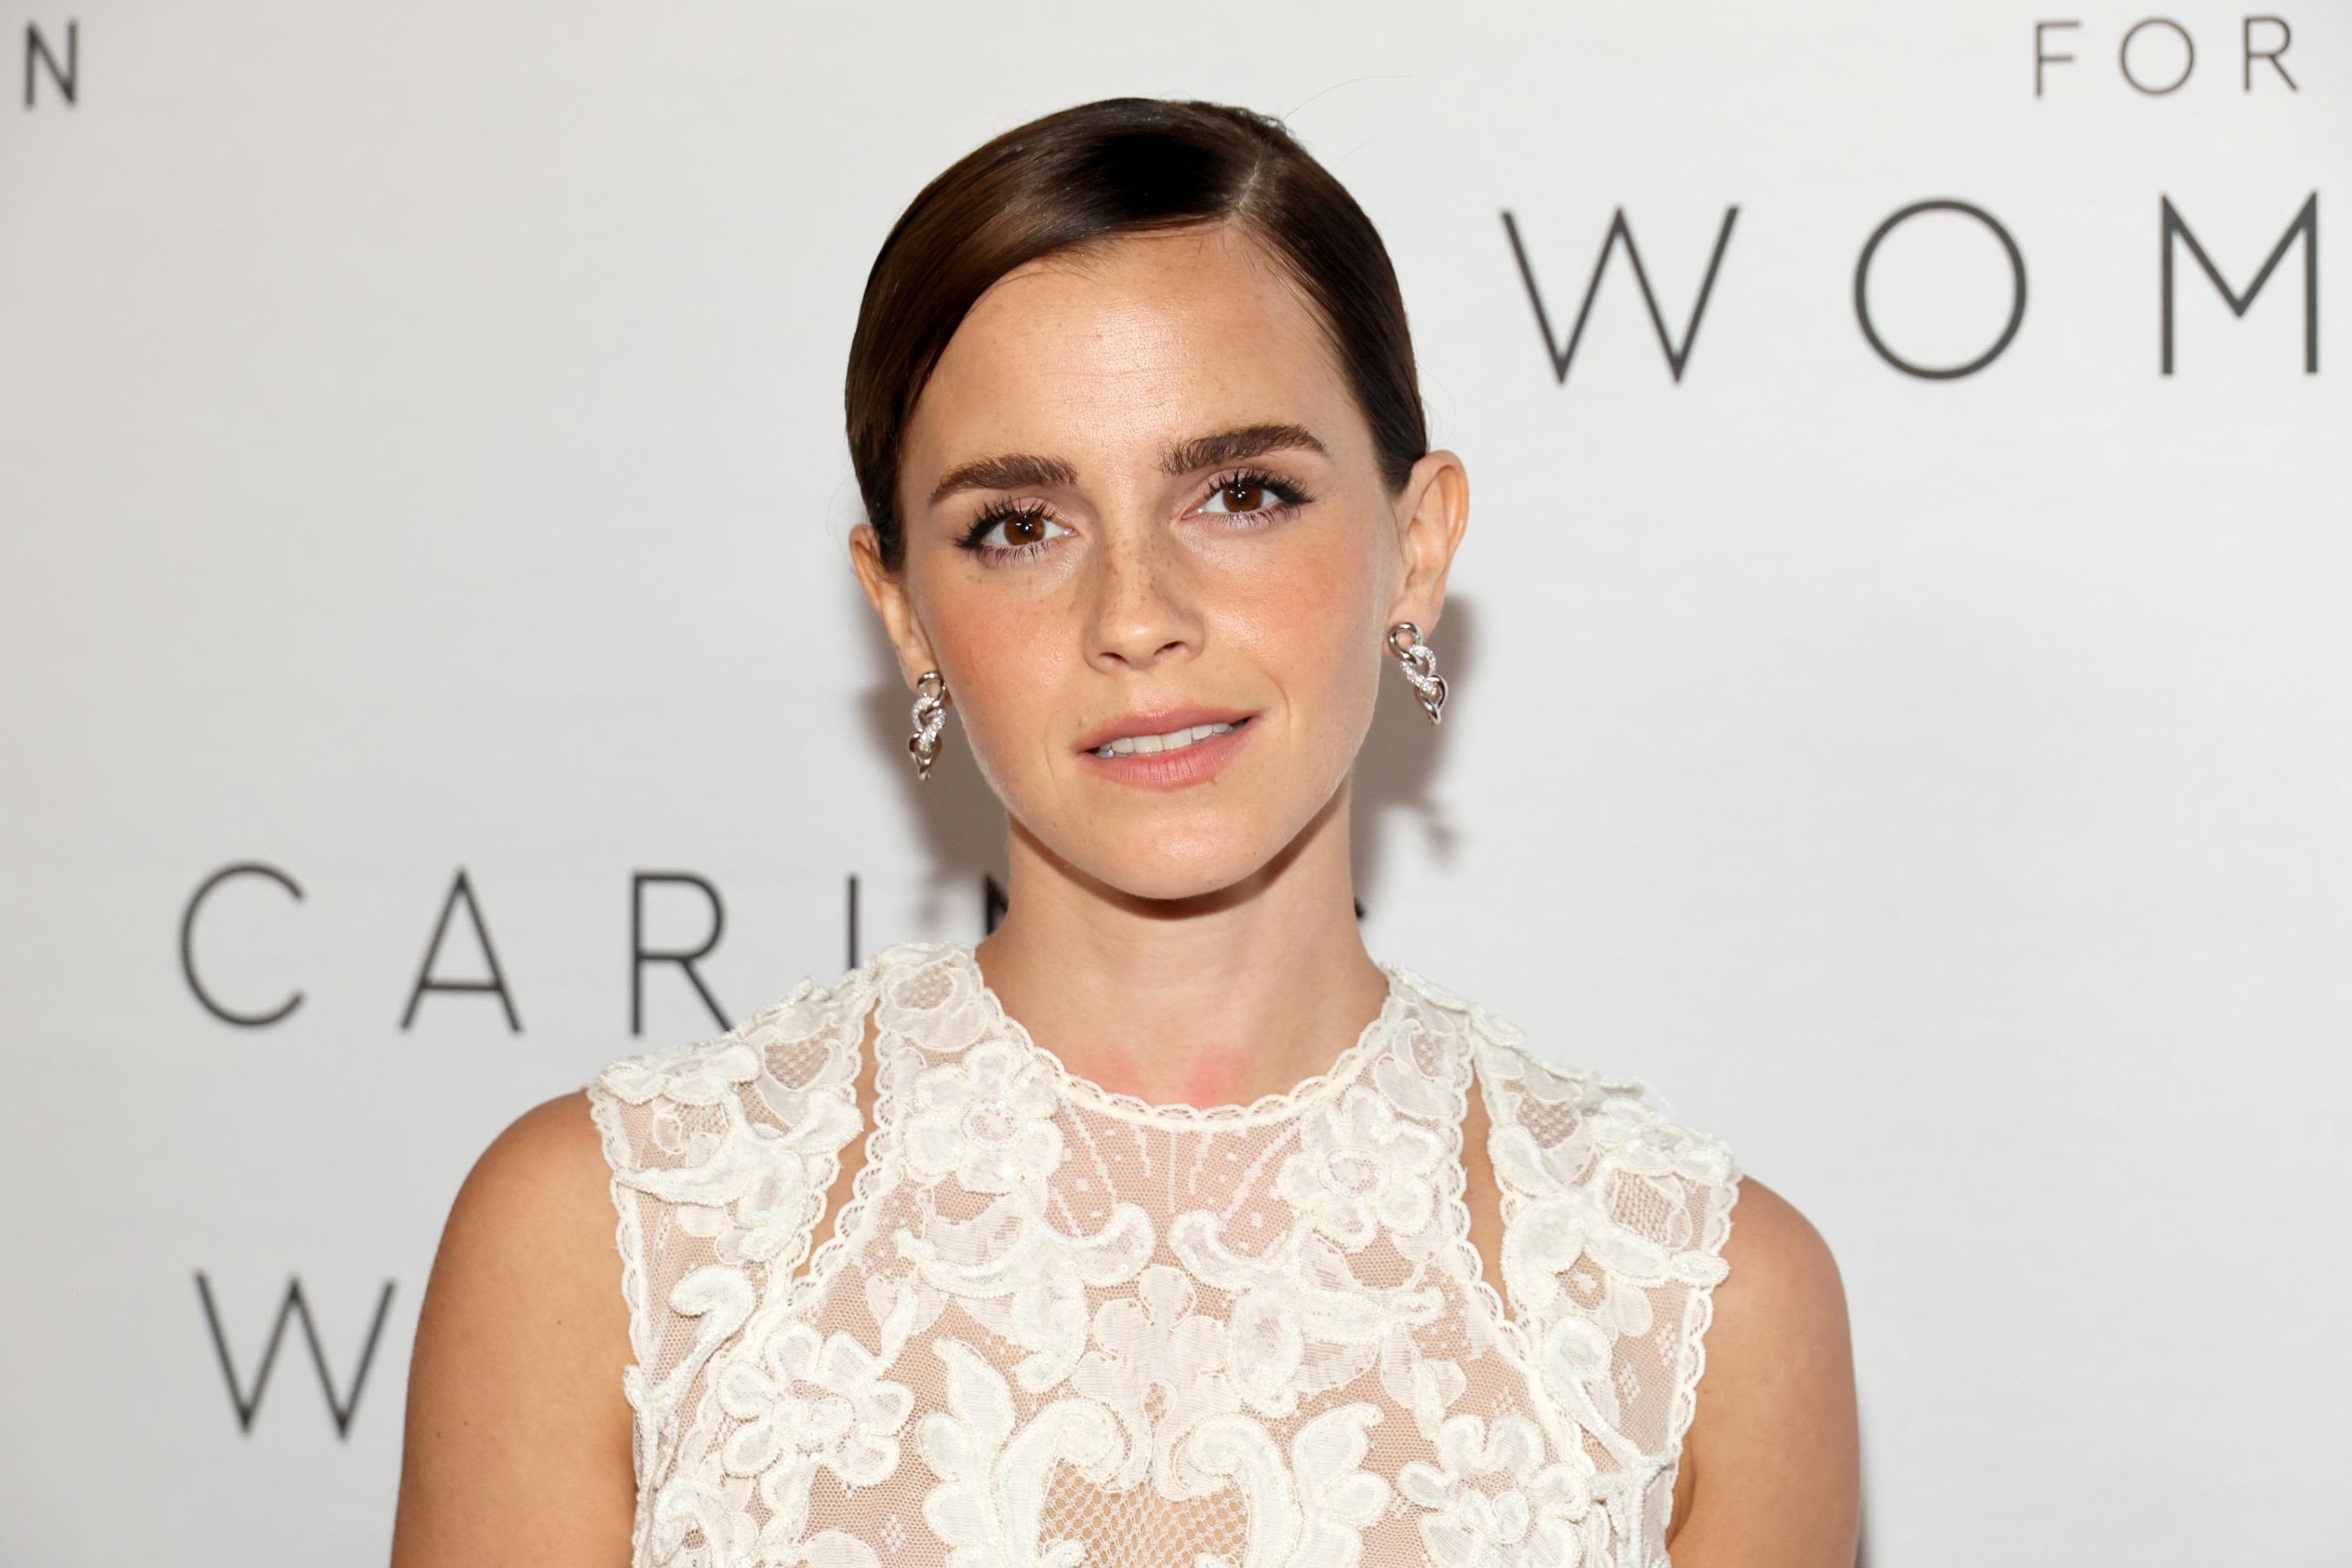 Emma Watson marks her 33rd birthday with very personal Instagram post